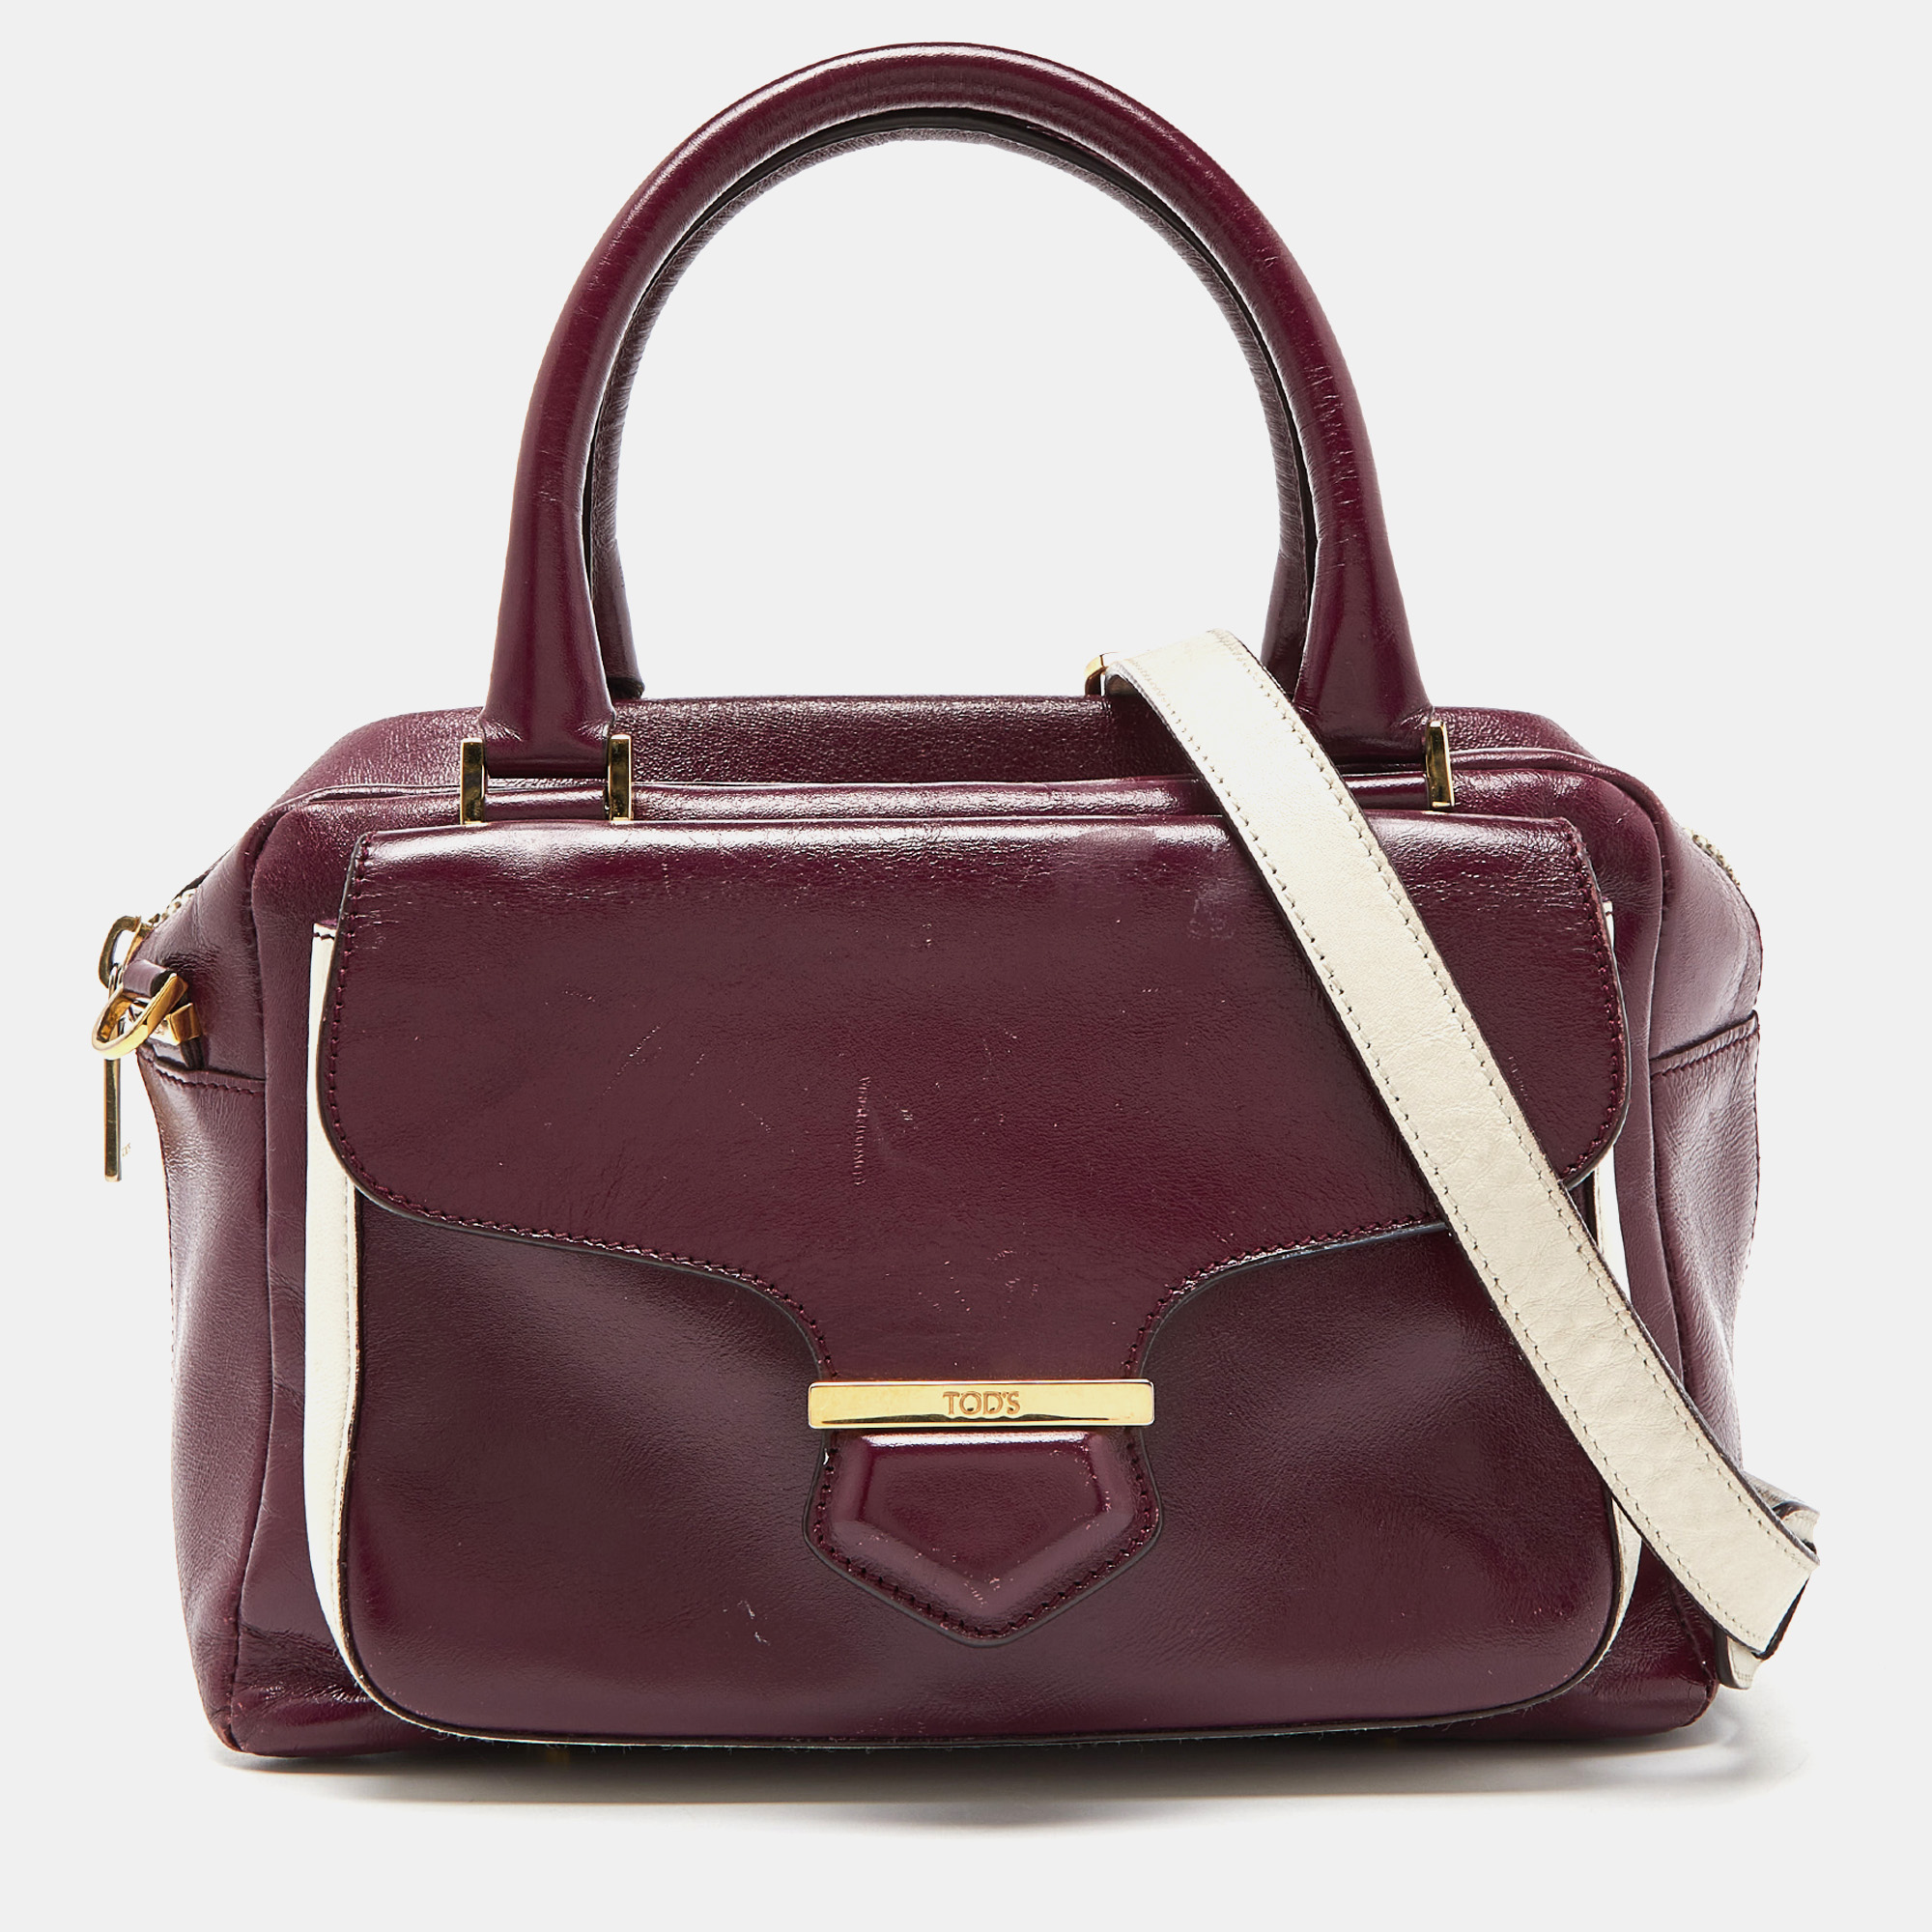 This Bowler bag from Tods is simple in design but high on style. Crafted from glossy leather the bag features double top handles a shoulder strap and protective feet at the bottom. It has an exterior flap pocket and a top zipper reveals a fabric interior for your necessities. The bag is truly a luxe addition to your style.